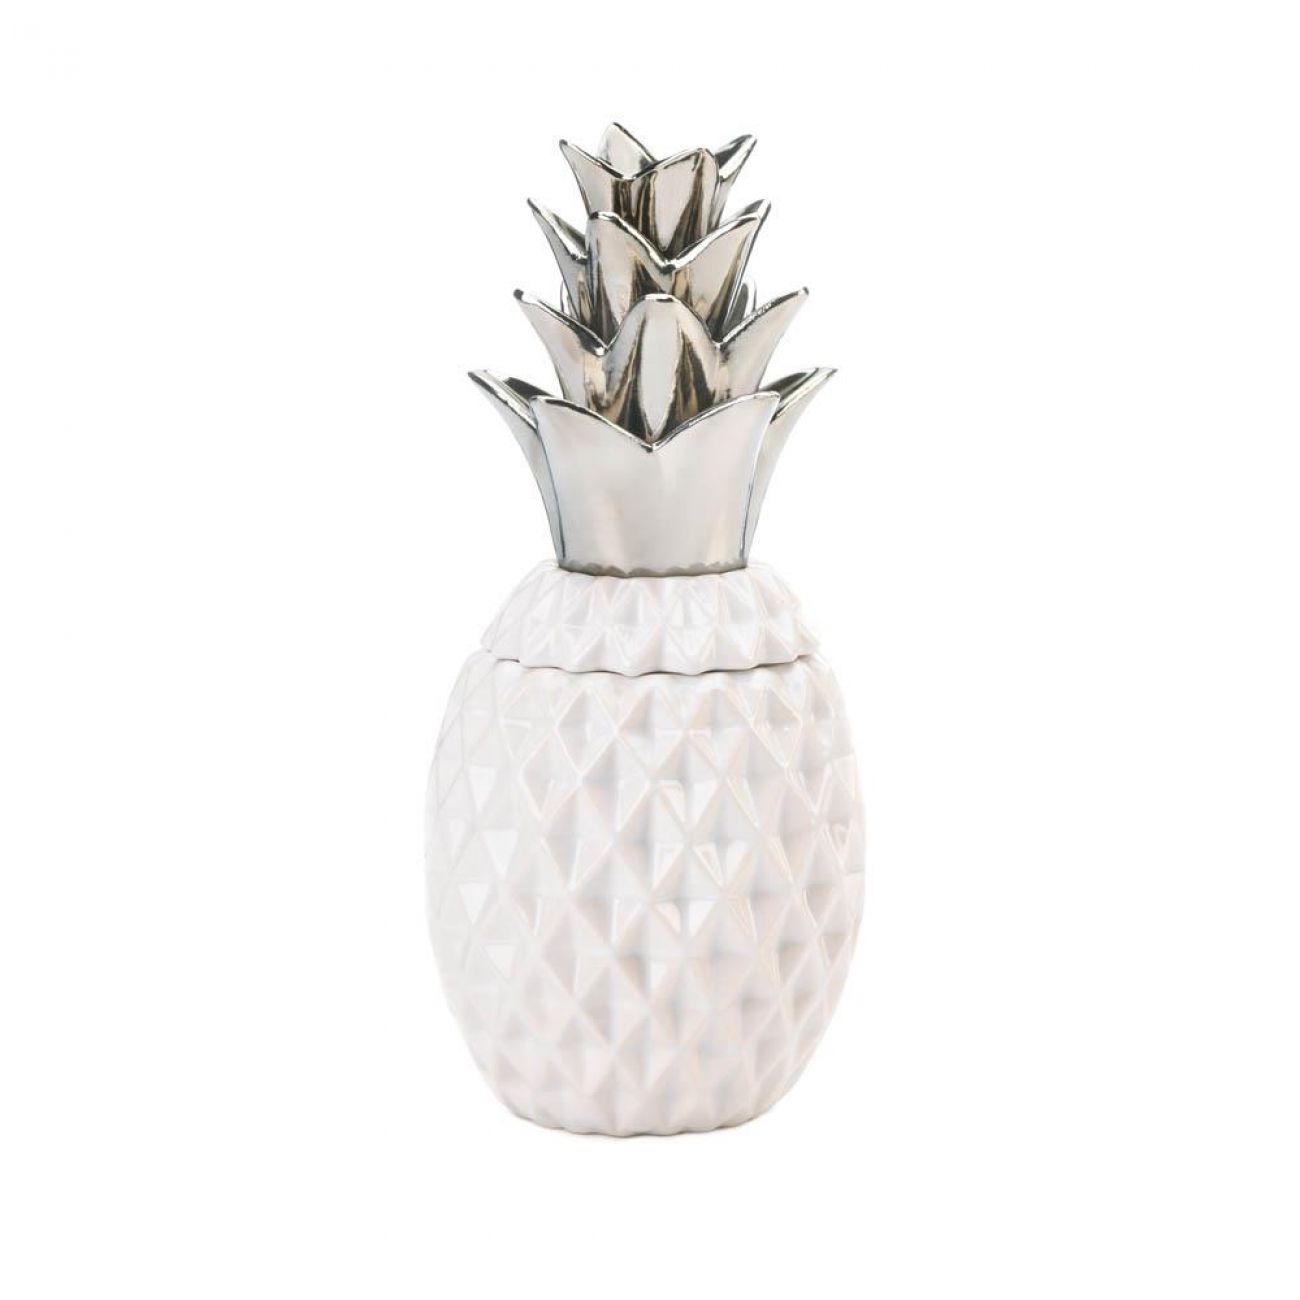 12 Silver Topped Pineapple Jar